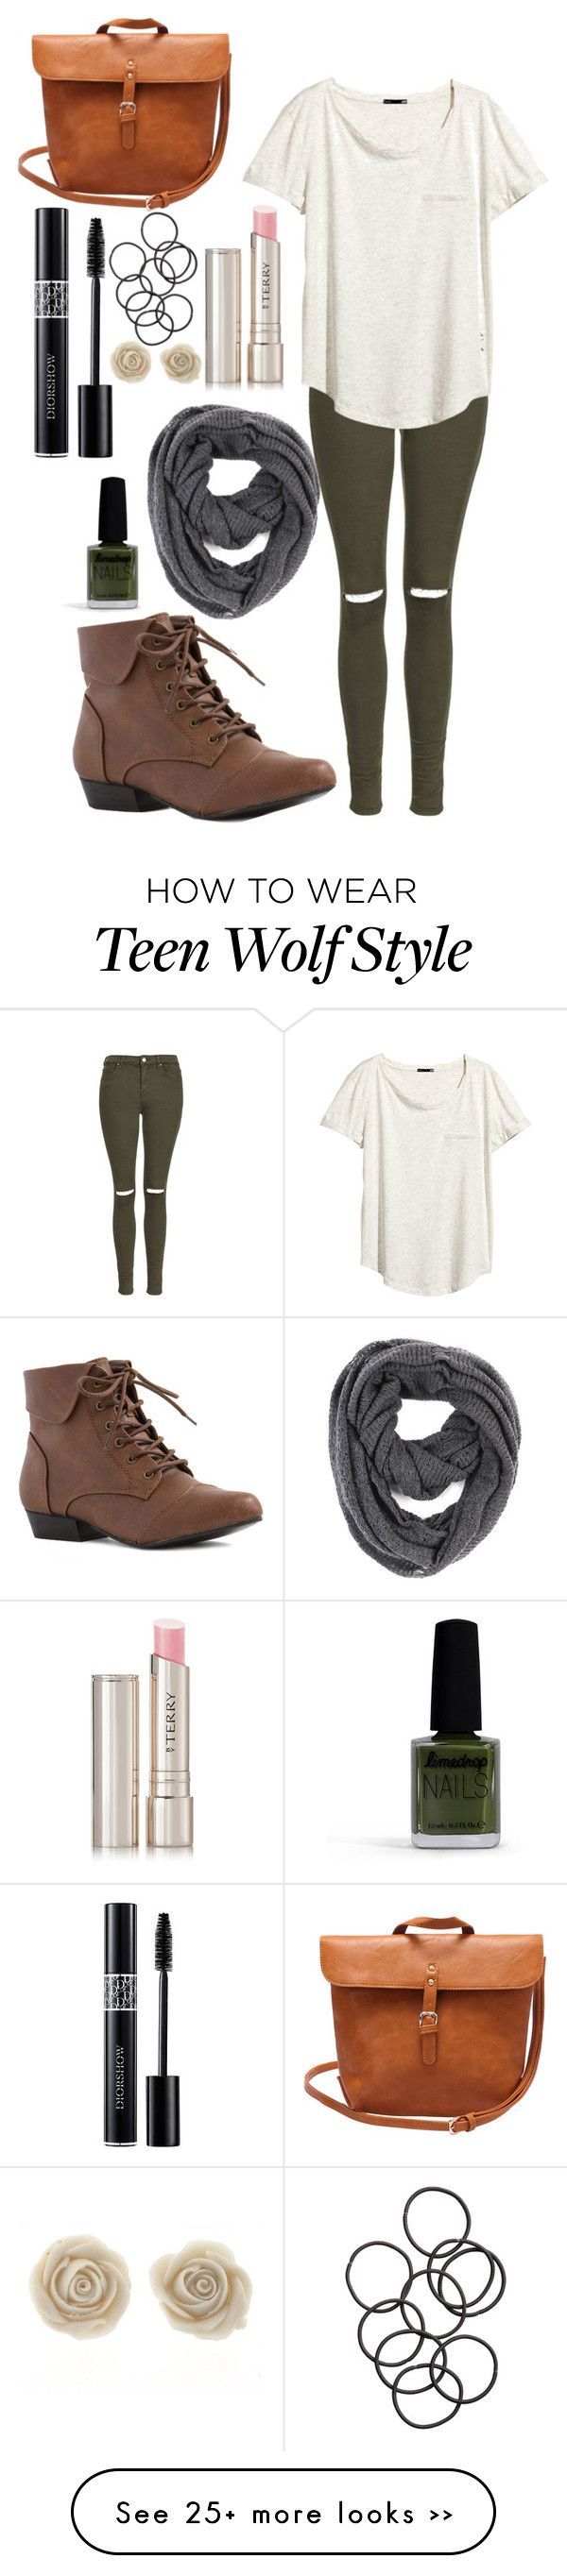 “Teen Wolf- Isaac Lahey Inspired Outfit” by lili-c on Polyvore